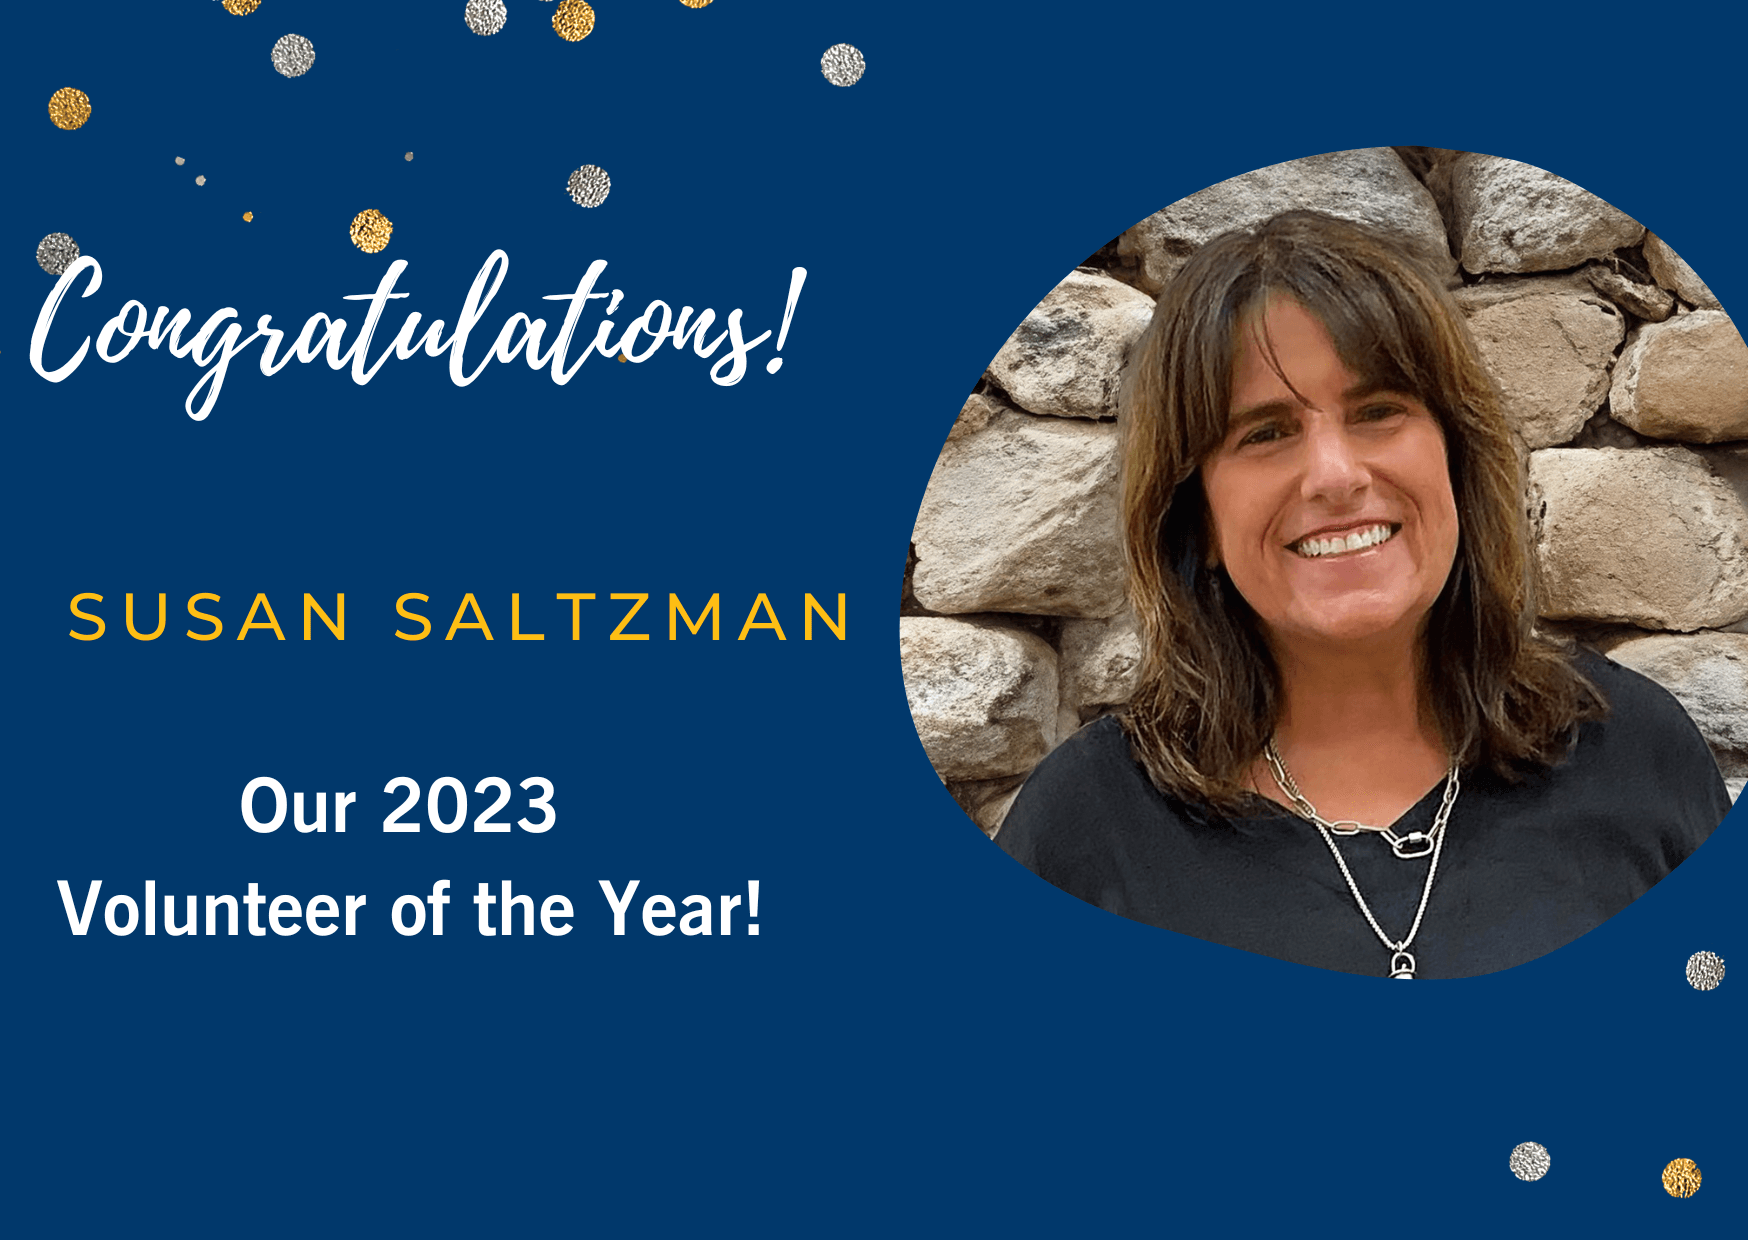 Susan Saltzman Recognized as our 2023 Volunteer of the Year